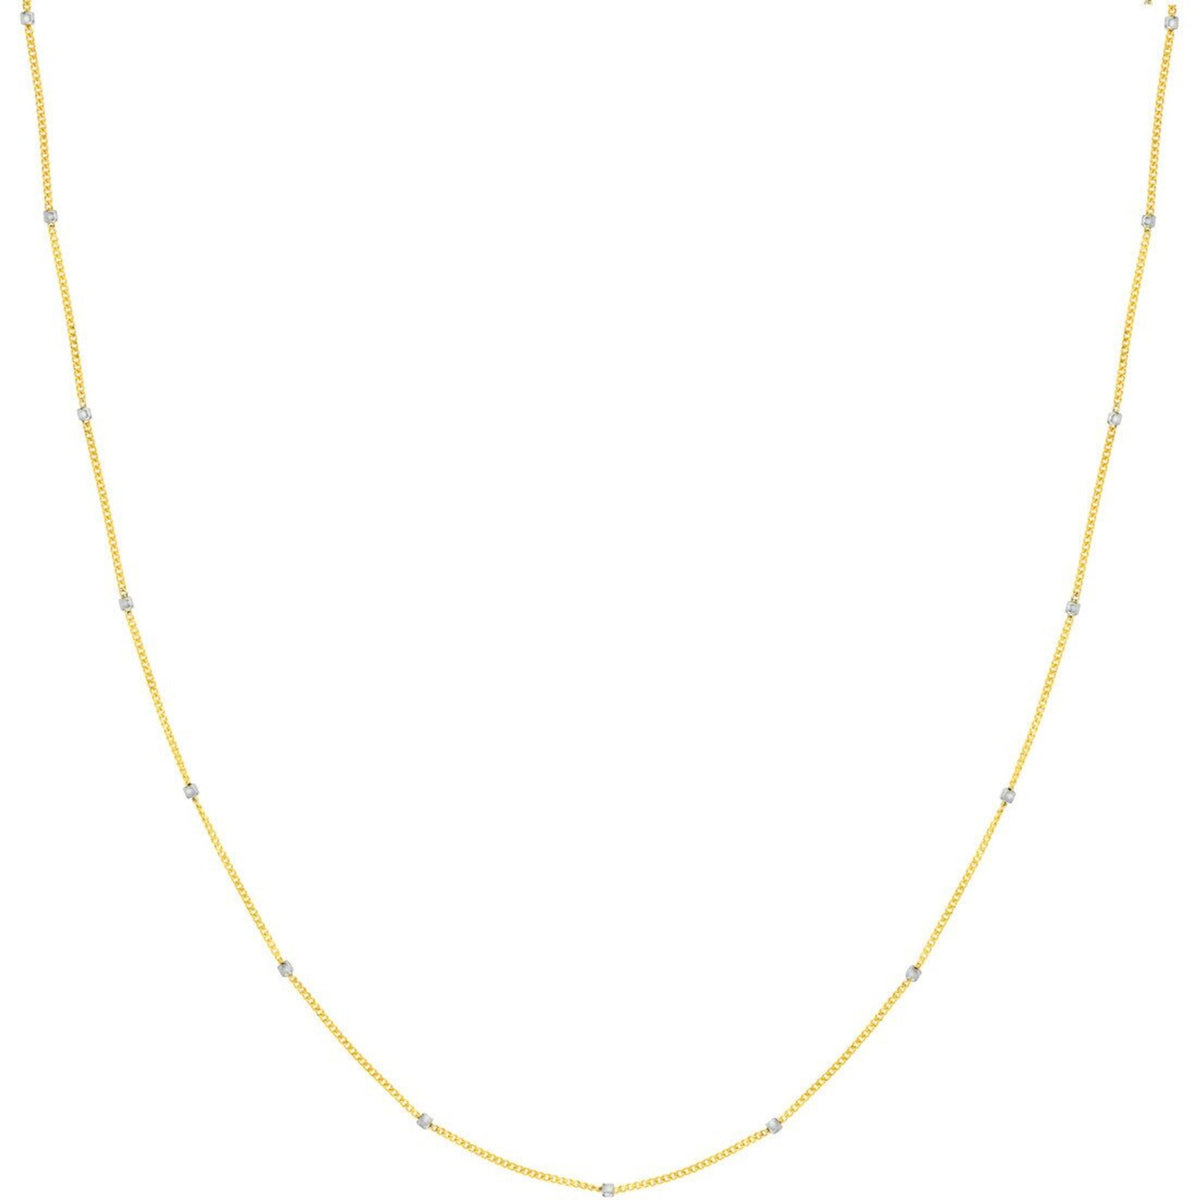 Olas d'Oro 24" Necklace - 14K Yellow/White Gold Two-Tone Cube Saturn Chain with Lobster Lock